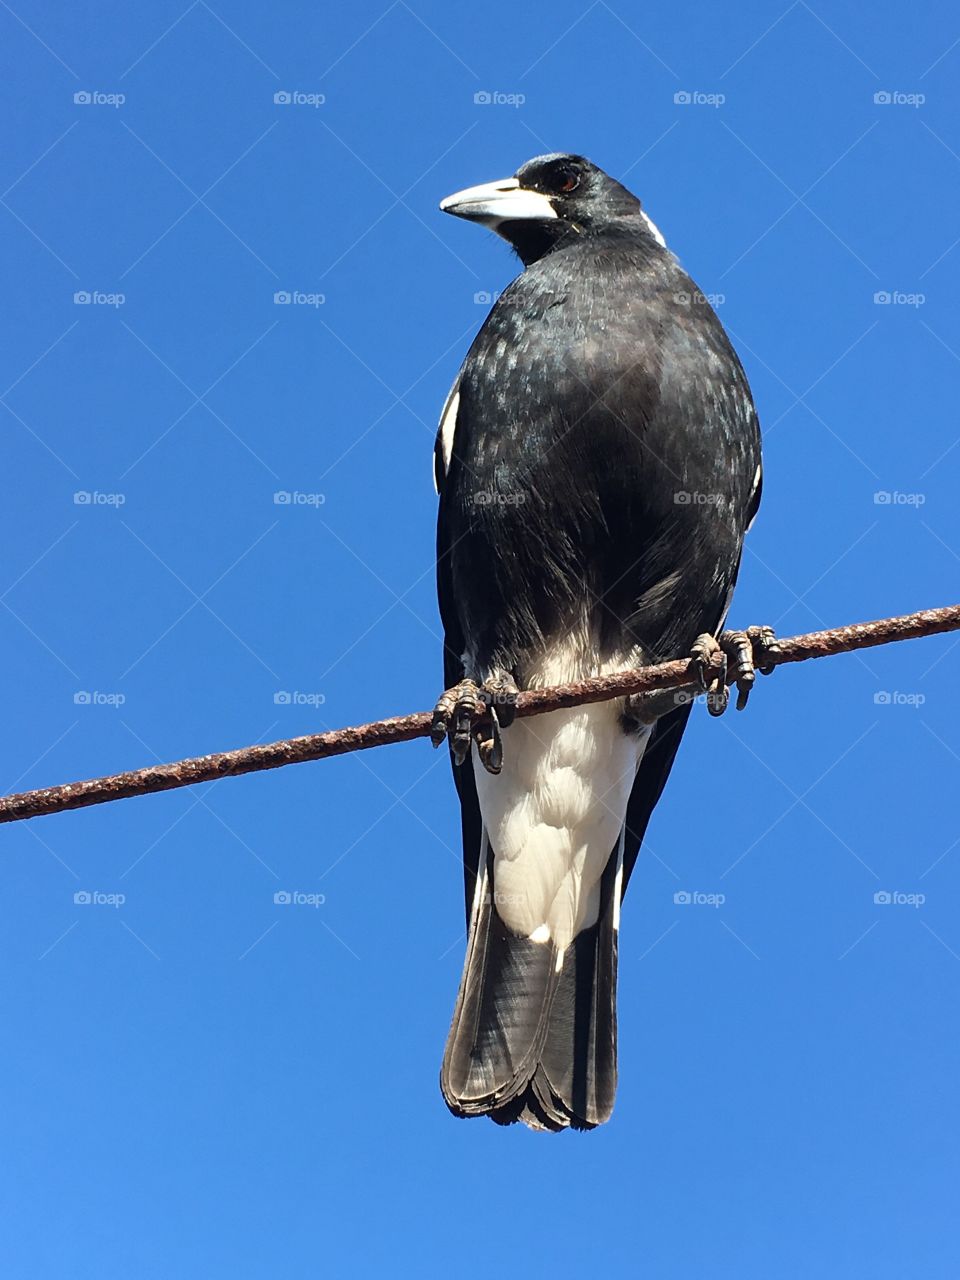 Full front head to tail view magpie sitting on a high clothesline wire against a bright vivid blue sky 